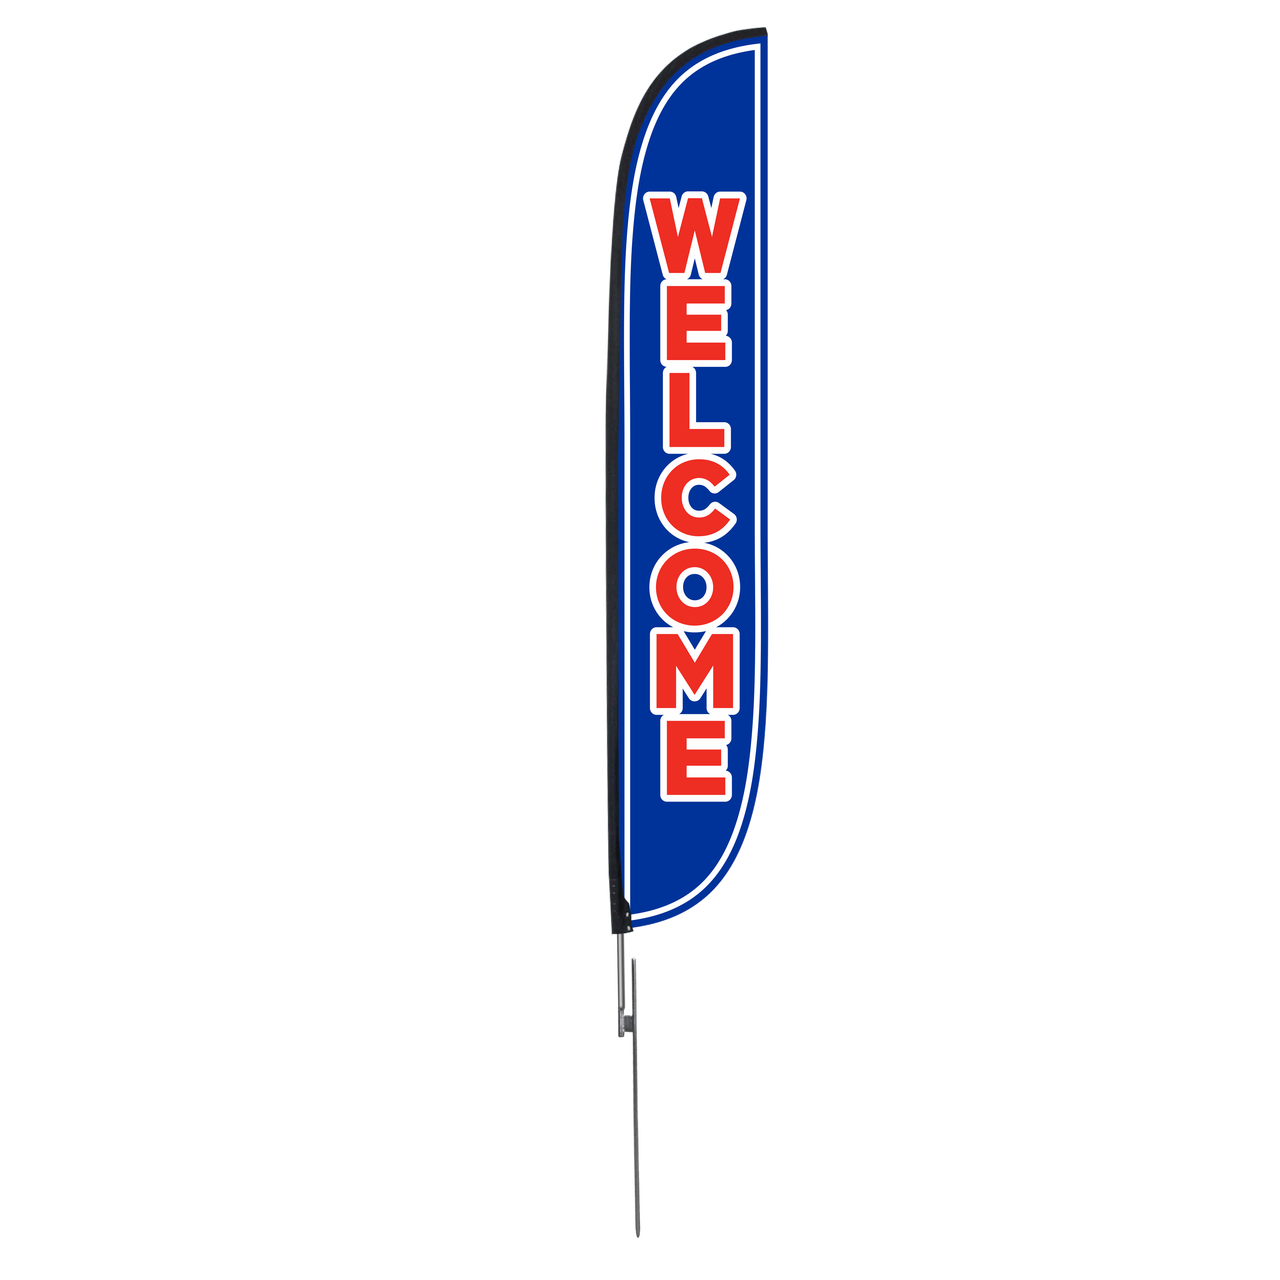 12ft Welcome Feather Flag Blue